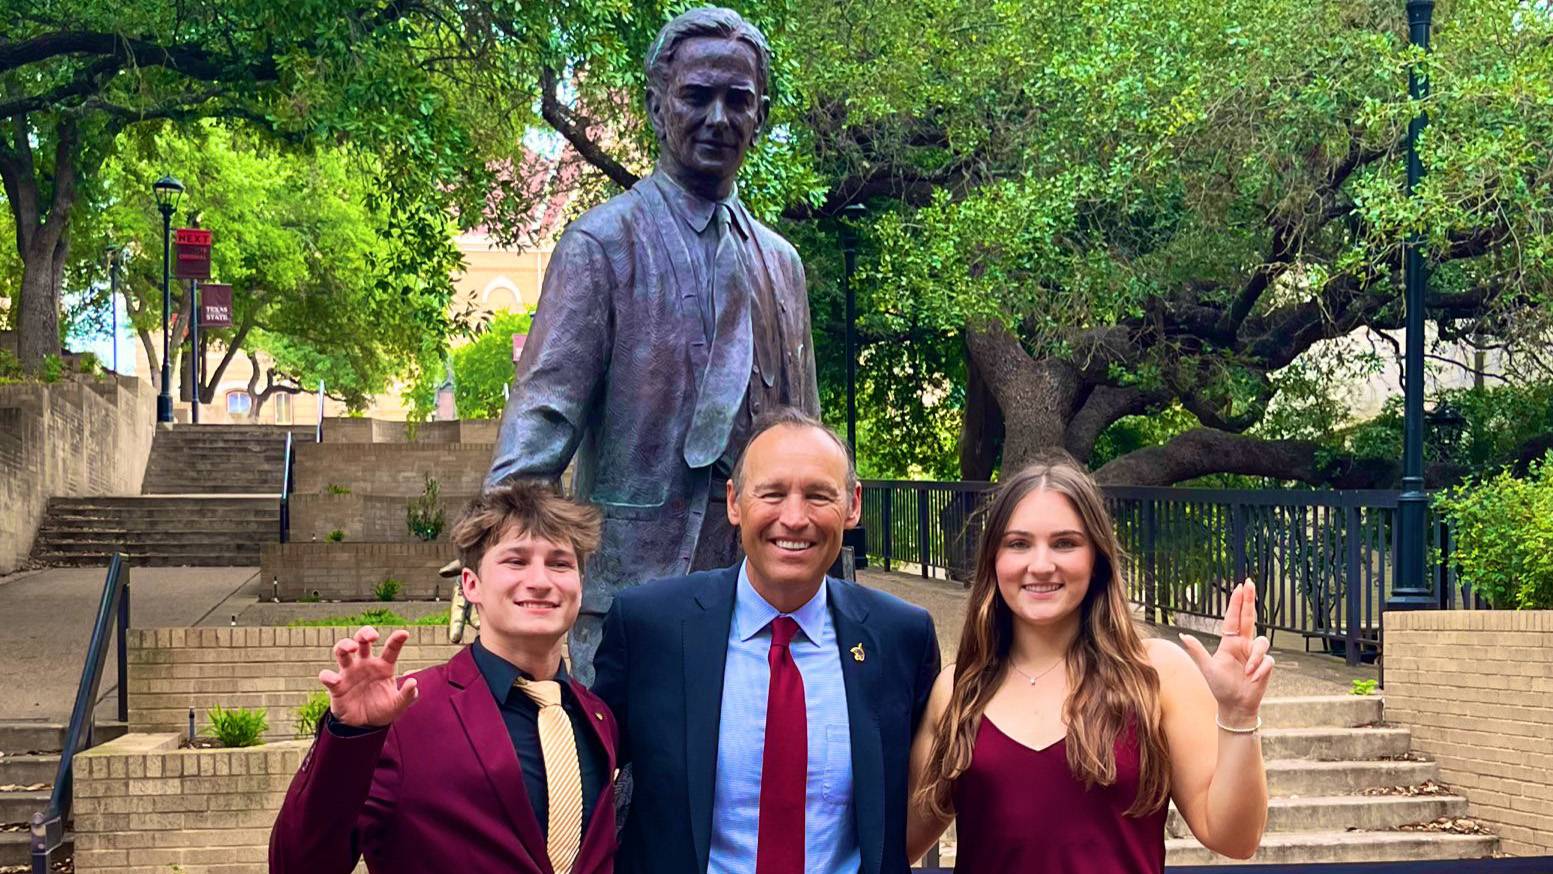 Student Body Vice President Donovan Brown, left, TXST President Kelly Damphousse, and Student Body President Olivia Alexander pose for a photo in front of the LBJ statue in The Quad.